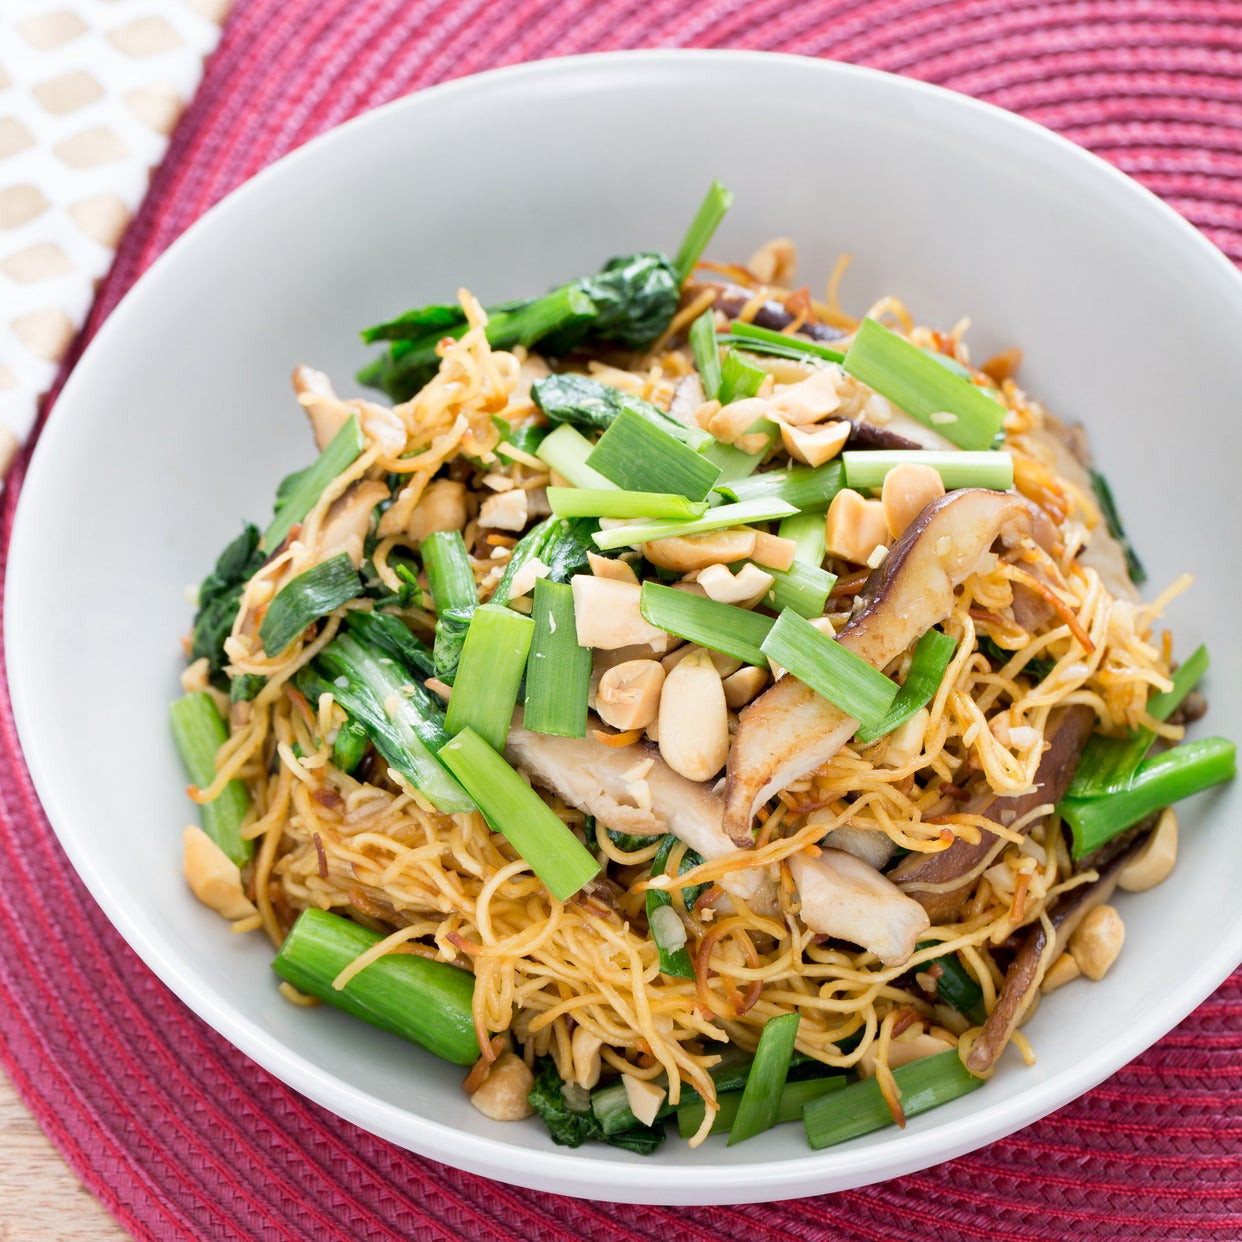 Chow Mein Stir Fry Noodles
 Recipe Stir Fried Chow Mein Noodles with Chinese Broccoli